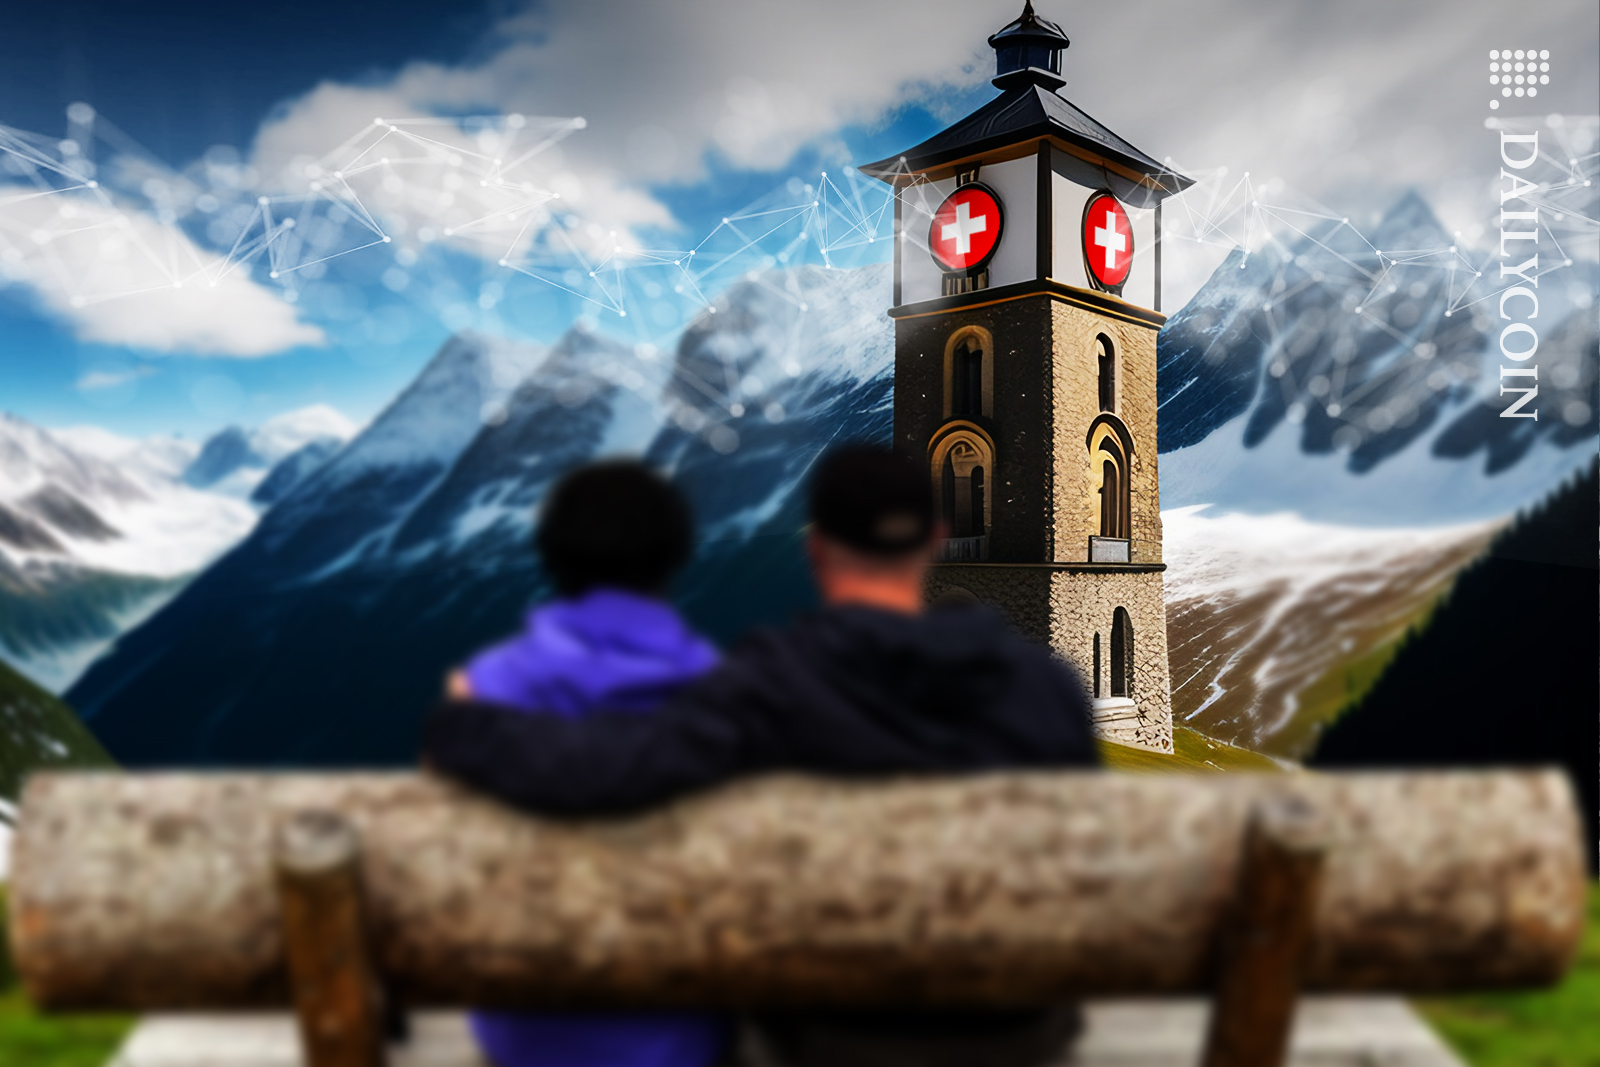 A couple looking at a Swiss tower clock with blockchain.